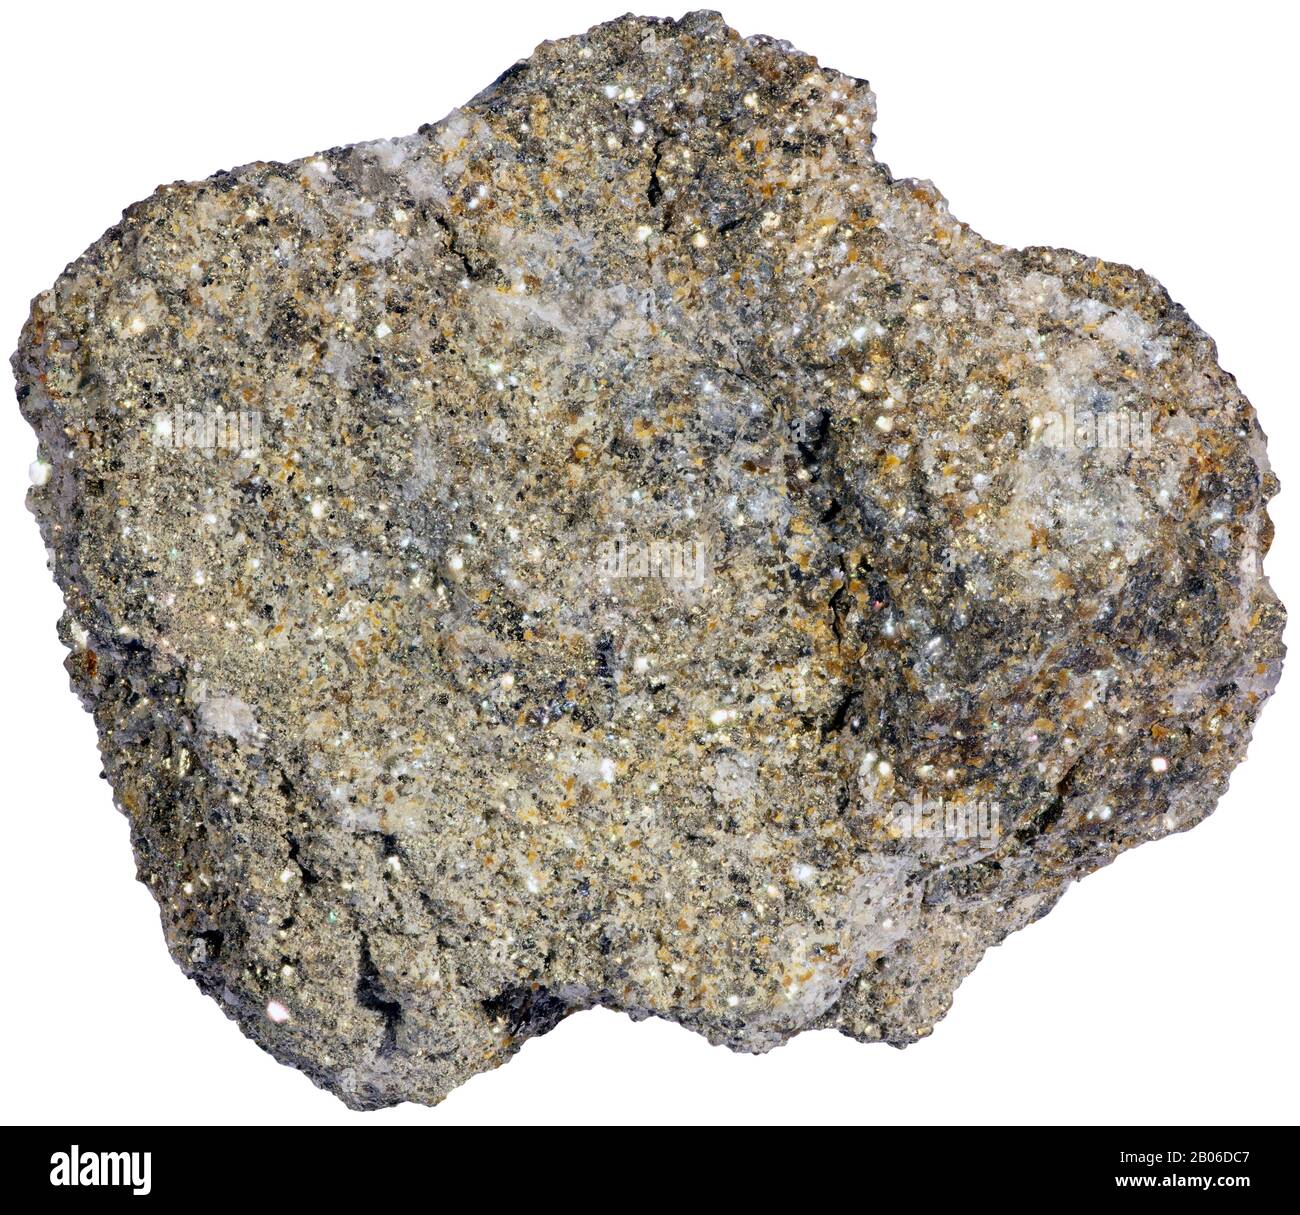 Krennerite, Timmins, Ontario Krennerite is a gold telluride mineral which can contain variable amounts of silver in the structure. The formula is AuTe Stock Photo